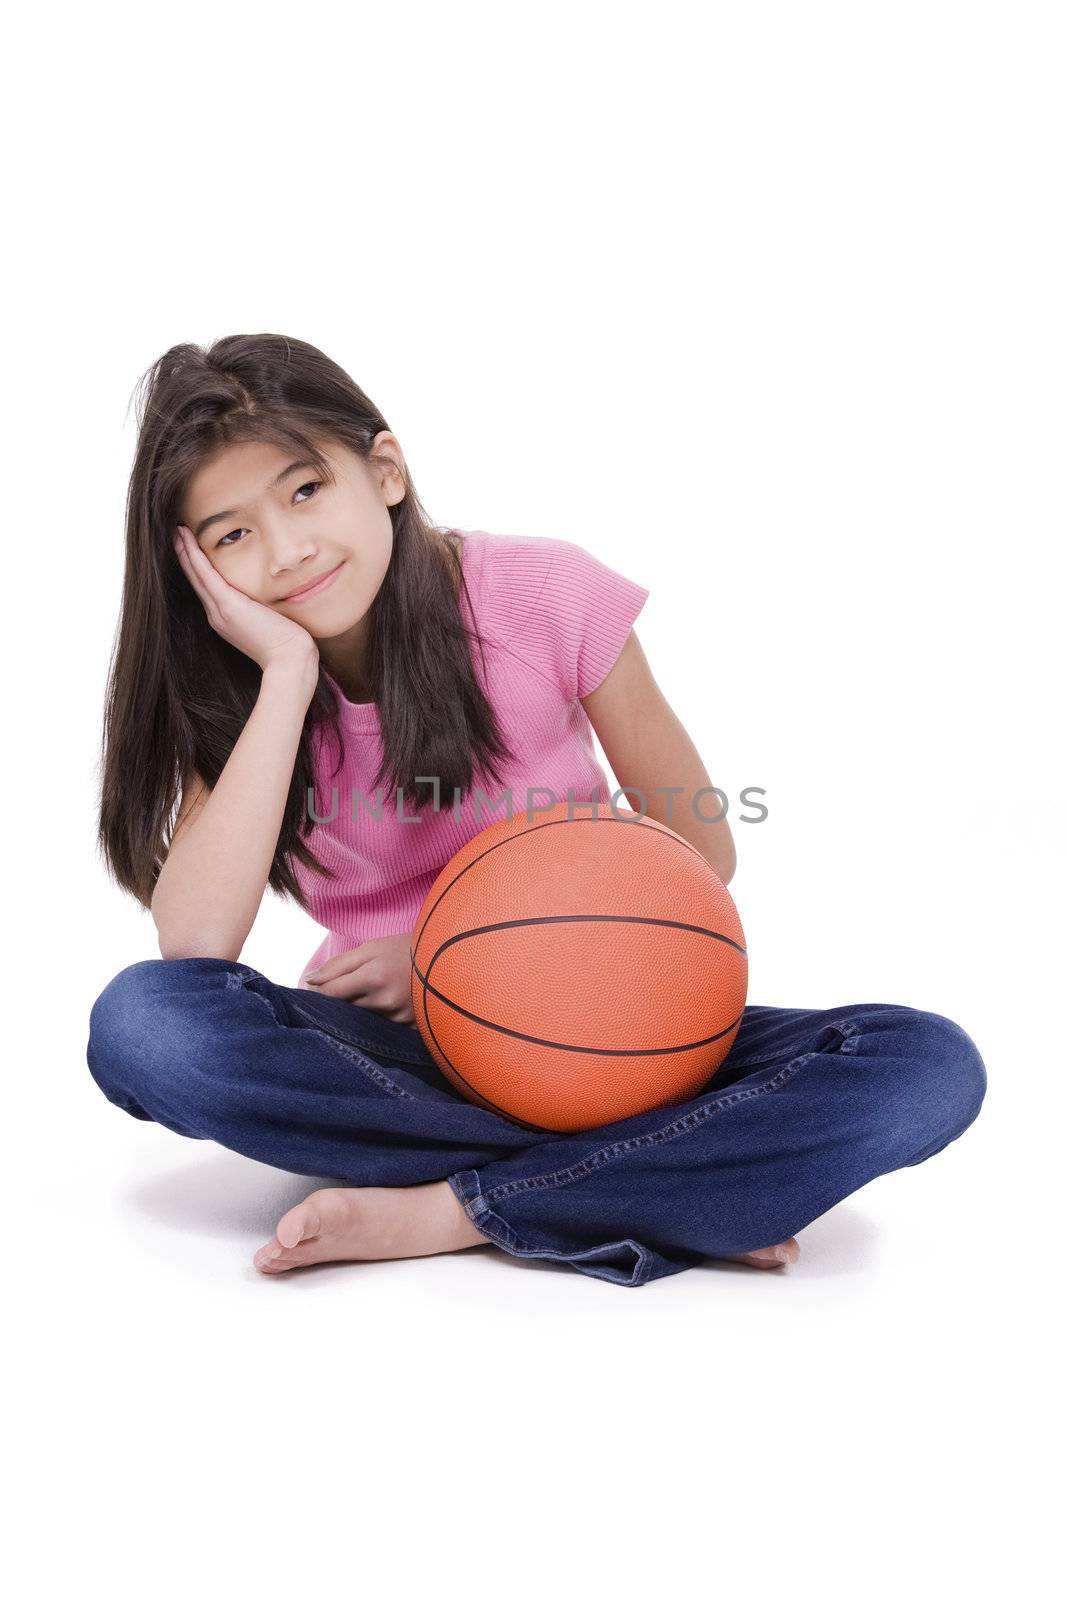 Young girl holding basketball, isolated on white by jarenwicklund